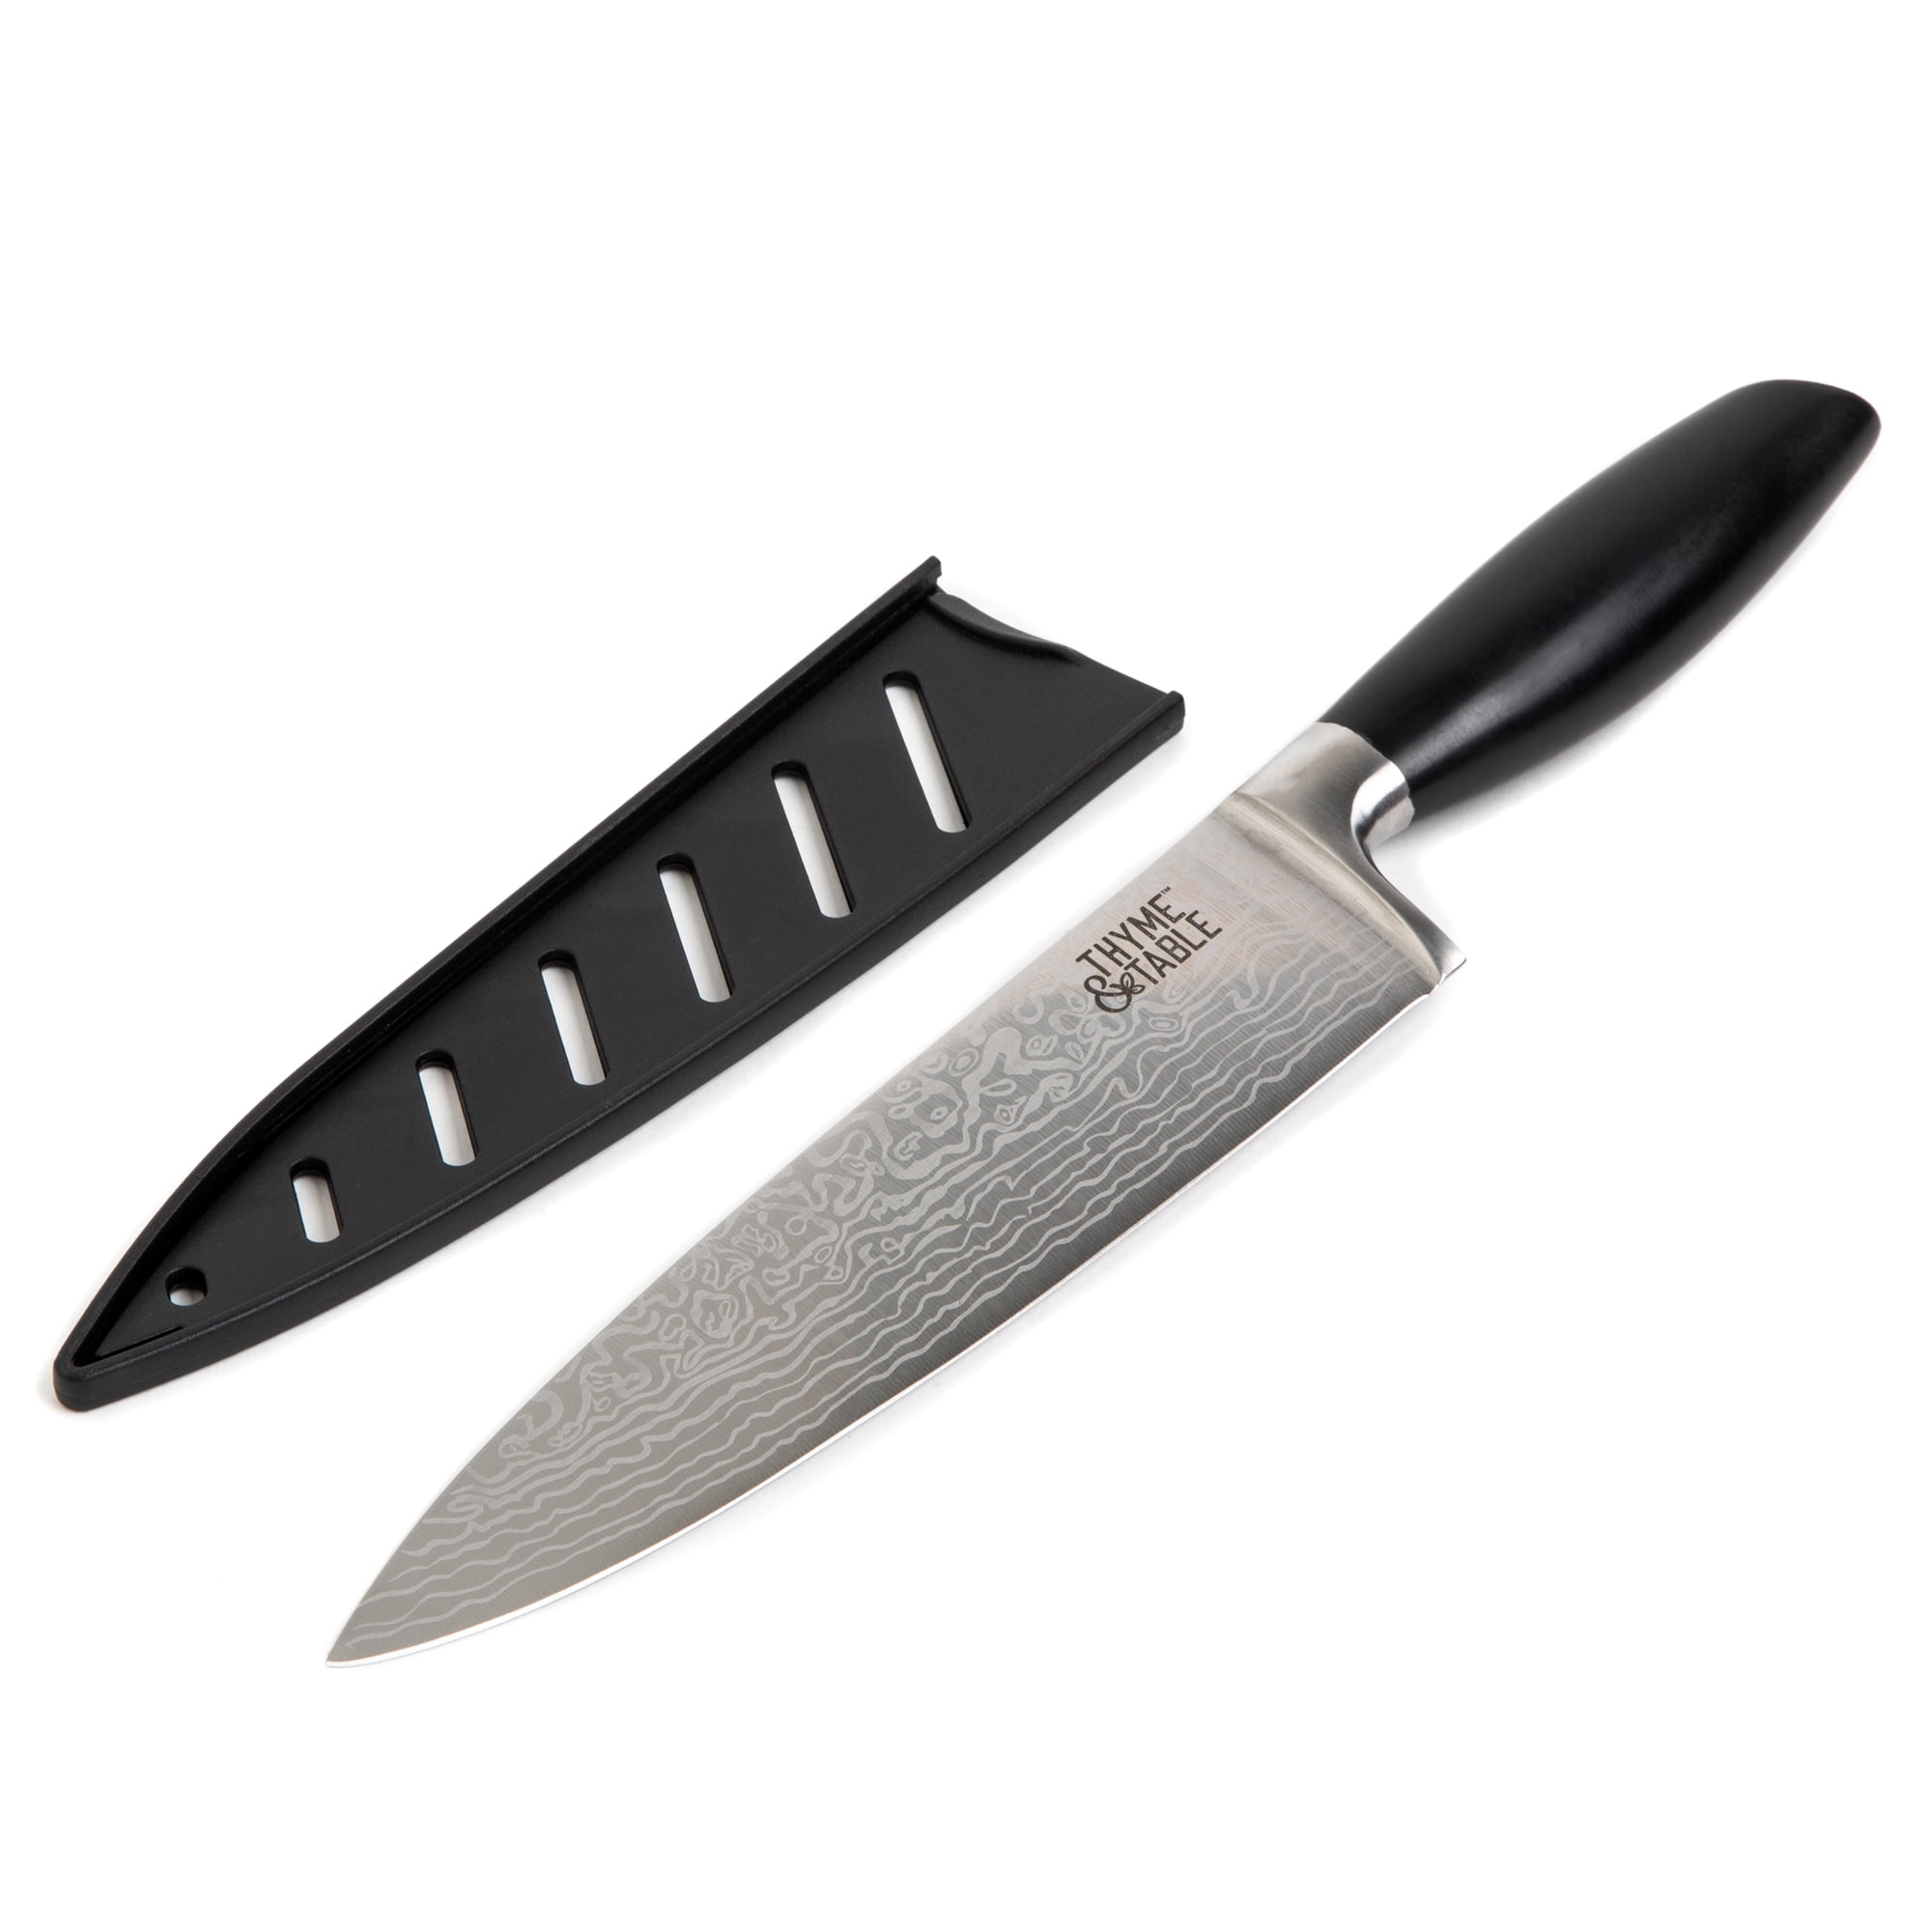 Thyme and Table Knife Vs Faberware Forged Knife 